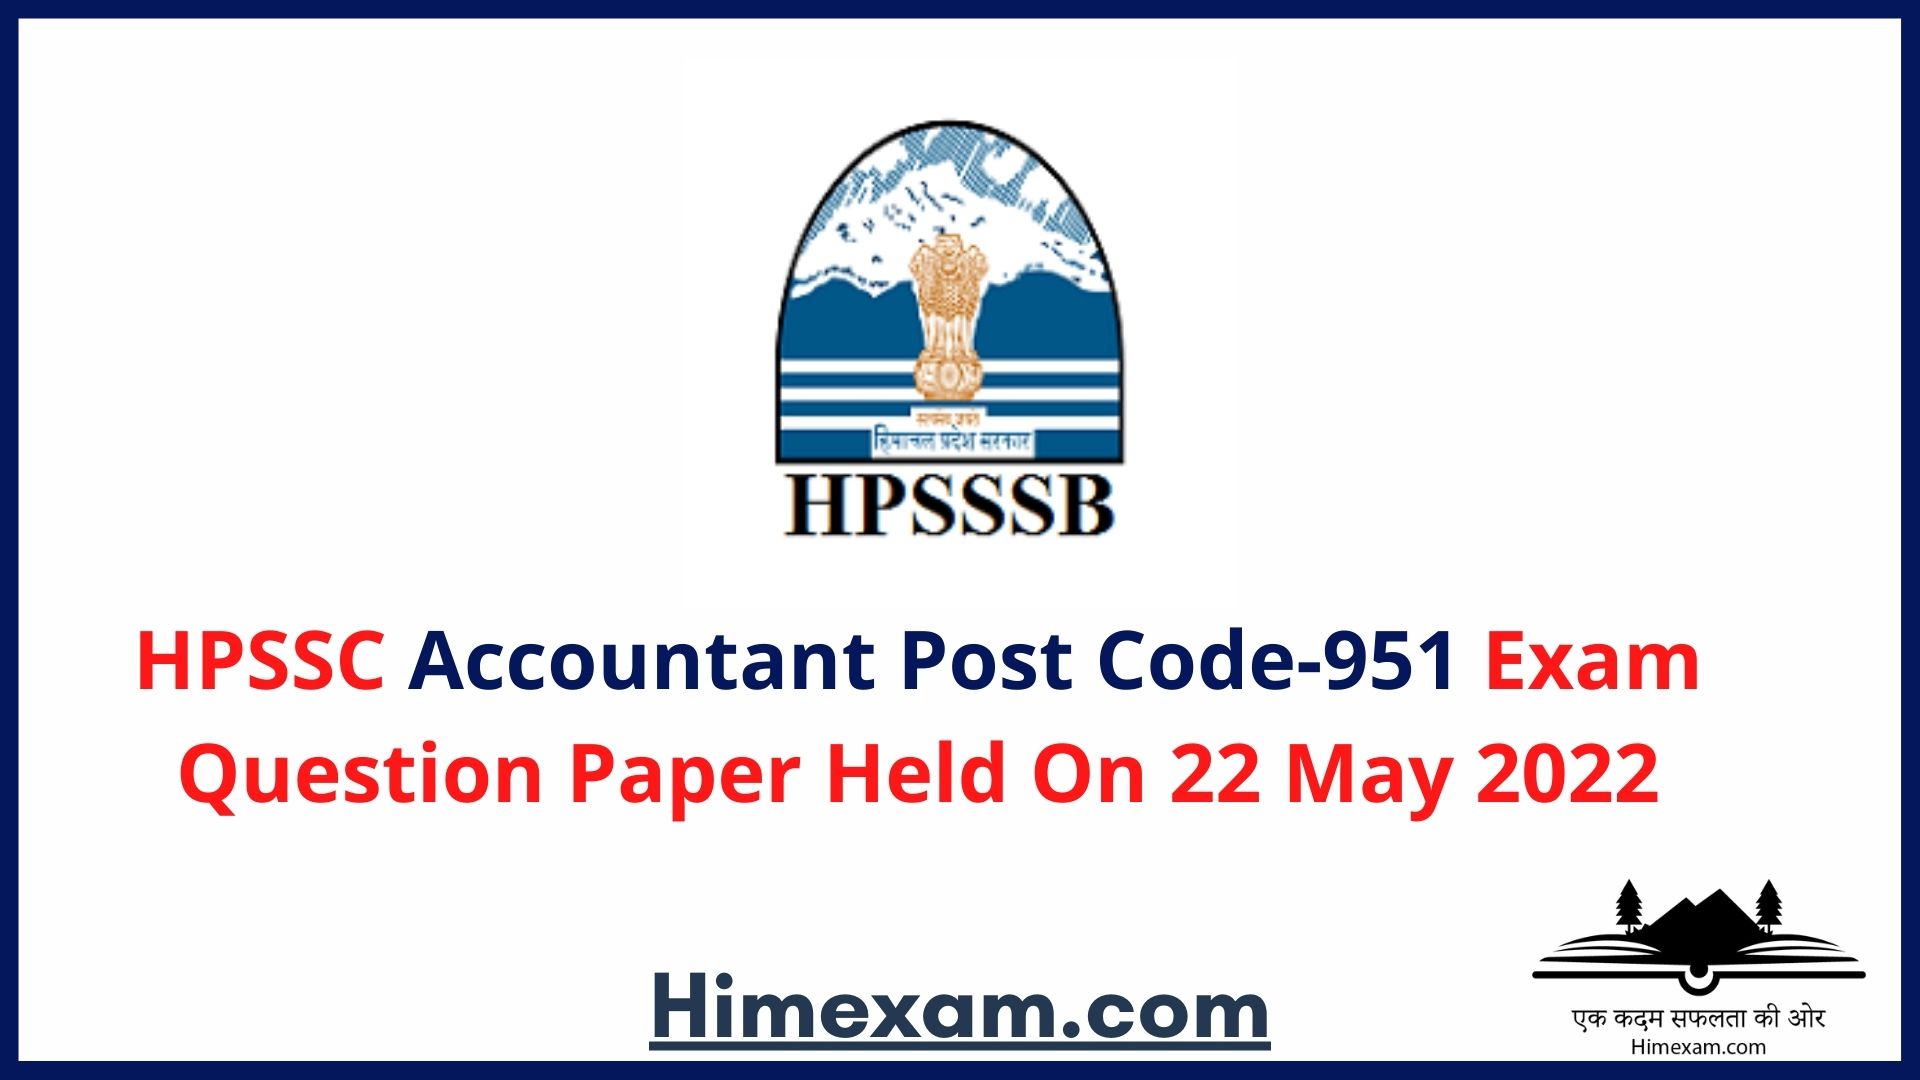 HPSSC Accountant Post Code-951 Exam Question Paper Held On 22 May 2022